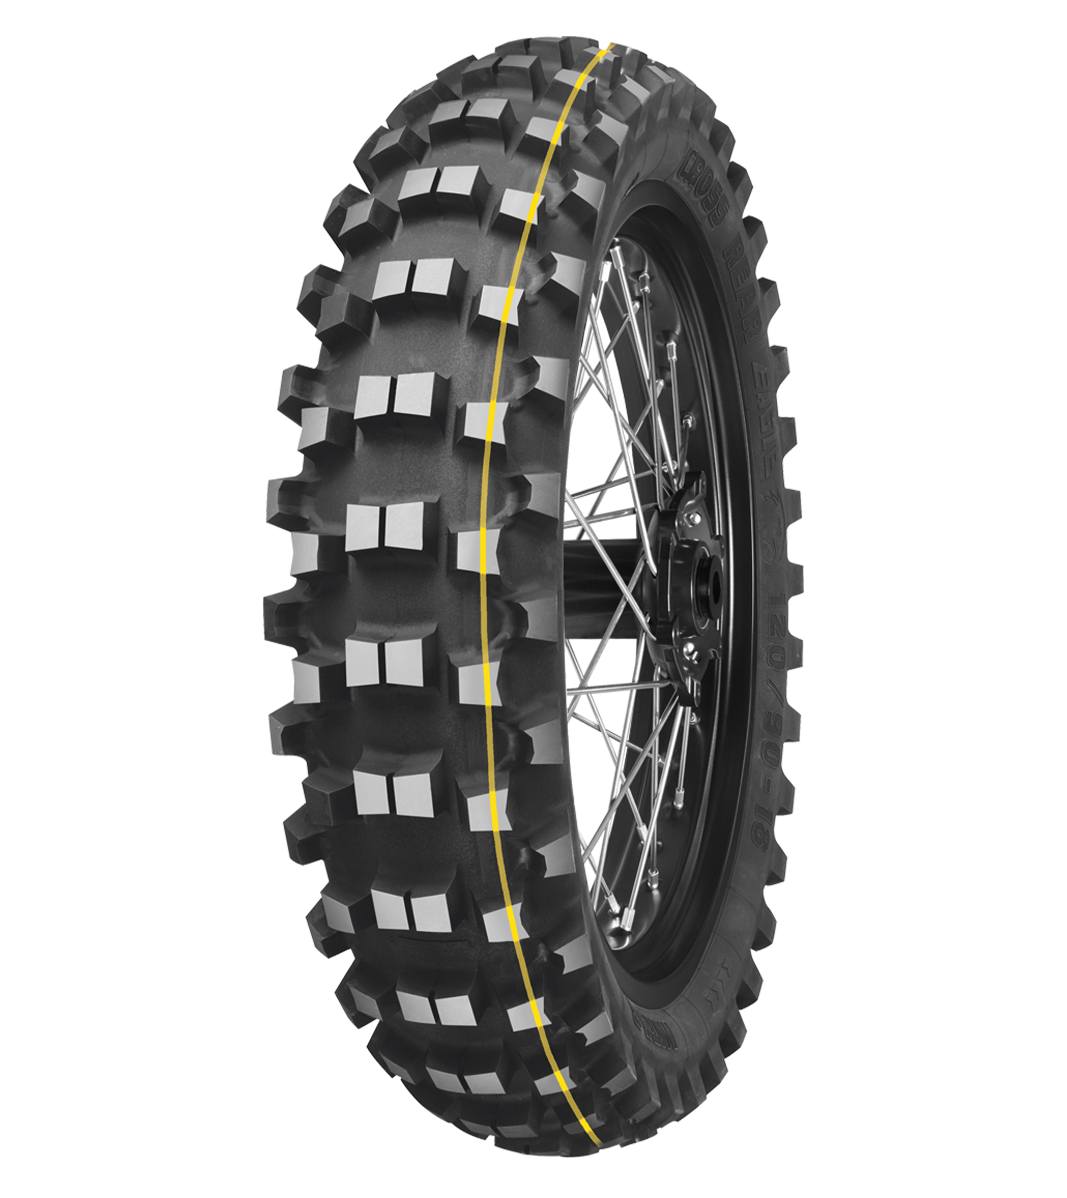 Mitas C-18 EAGLE 120/90-18 Enduro Competition Off-Road COUNTRY CROSS 65R Yellow Tube Rear Tire, 226555, 120/90-18, C-18 Eagle, Enduro, Enduro Competition, Off-Road, Rear, Tires - Imported and distributed in North & South America by Lindeco Genuine Powersports - Premier Powersports Equipment and Accessories for Motorcycle Enthusiasts, Professional Riders and Dealers.